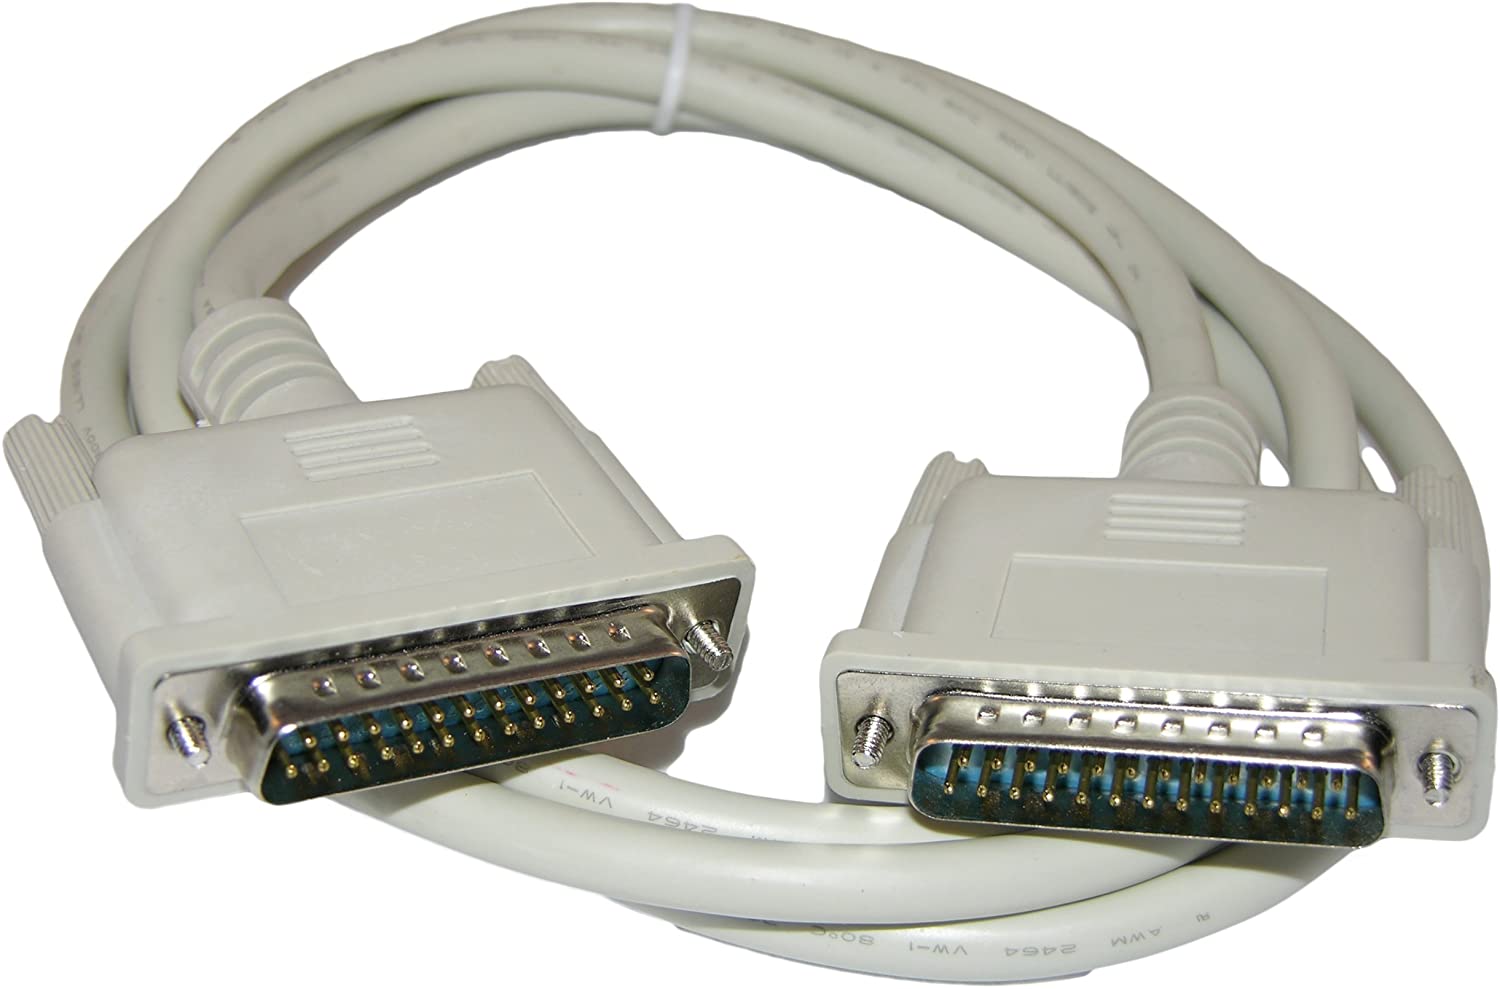 6FT DB25 Male to Male IEEE-1284 Straight-Thru Cable